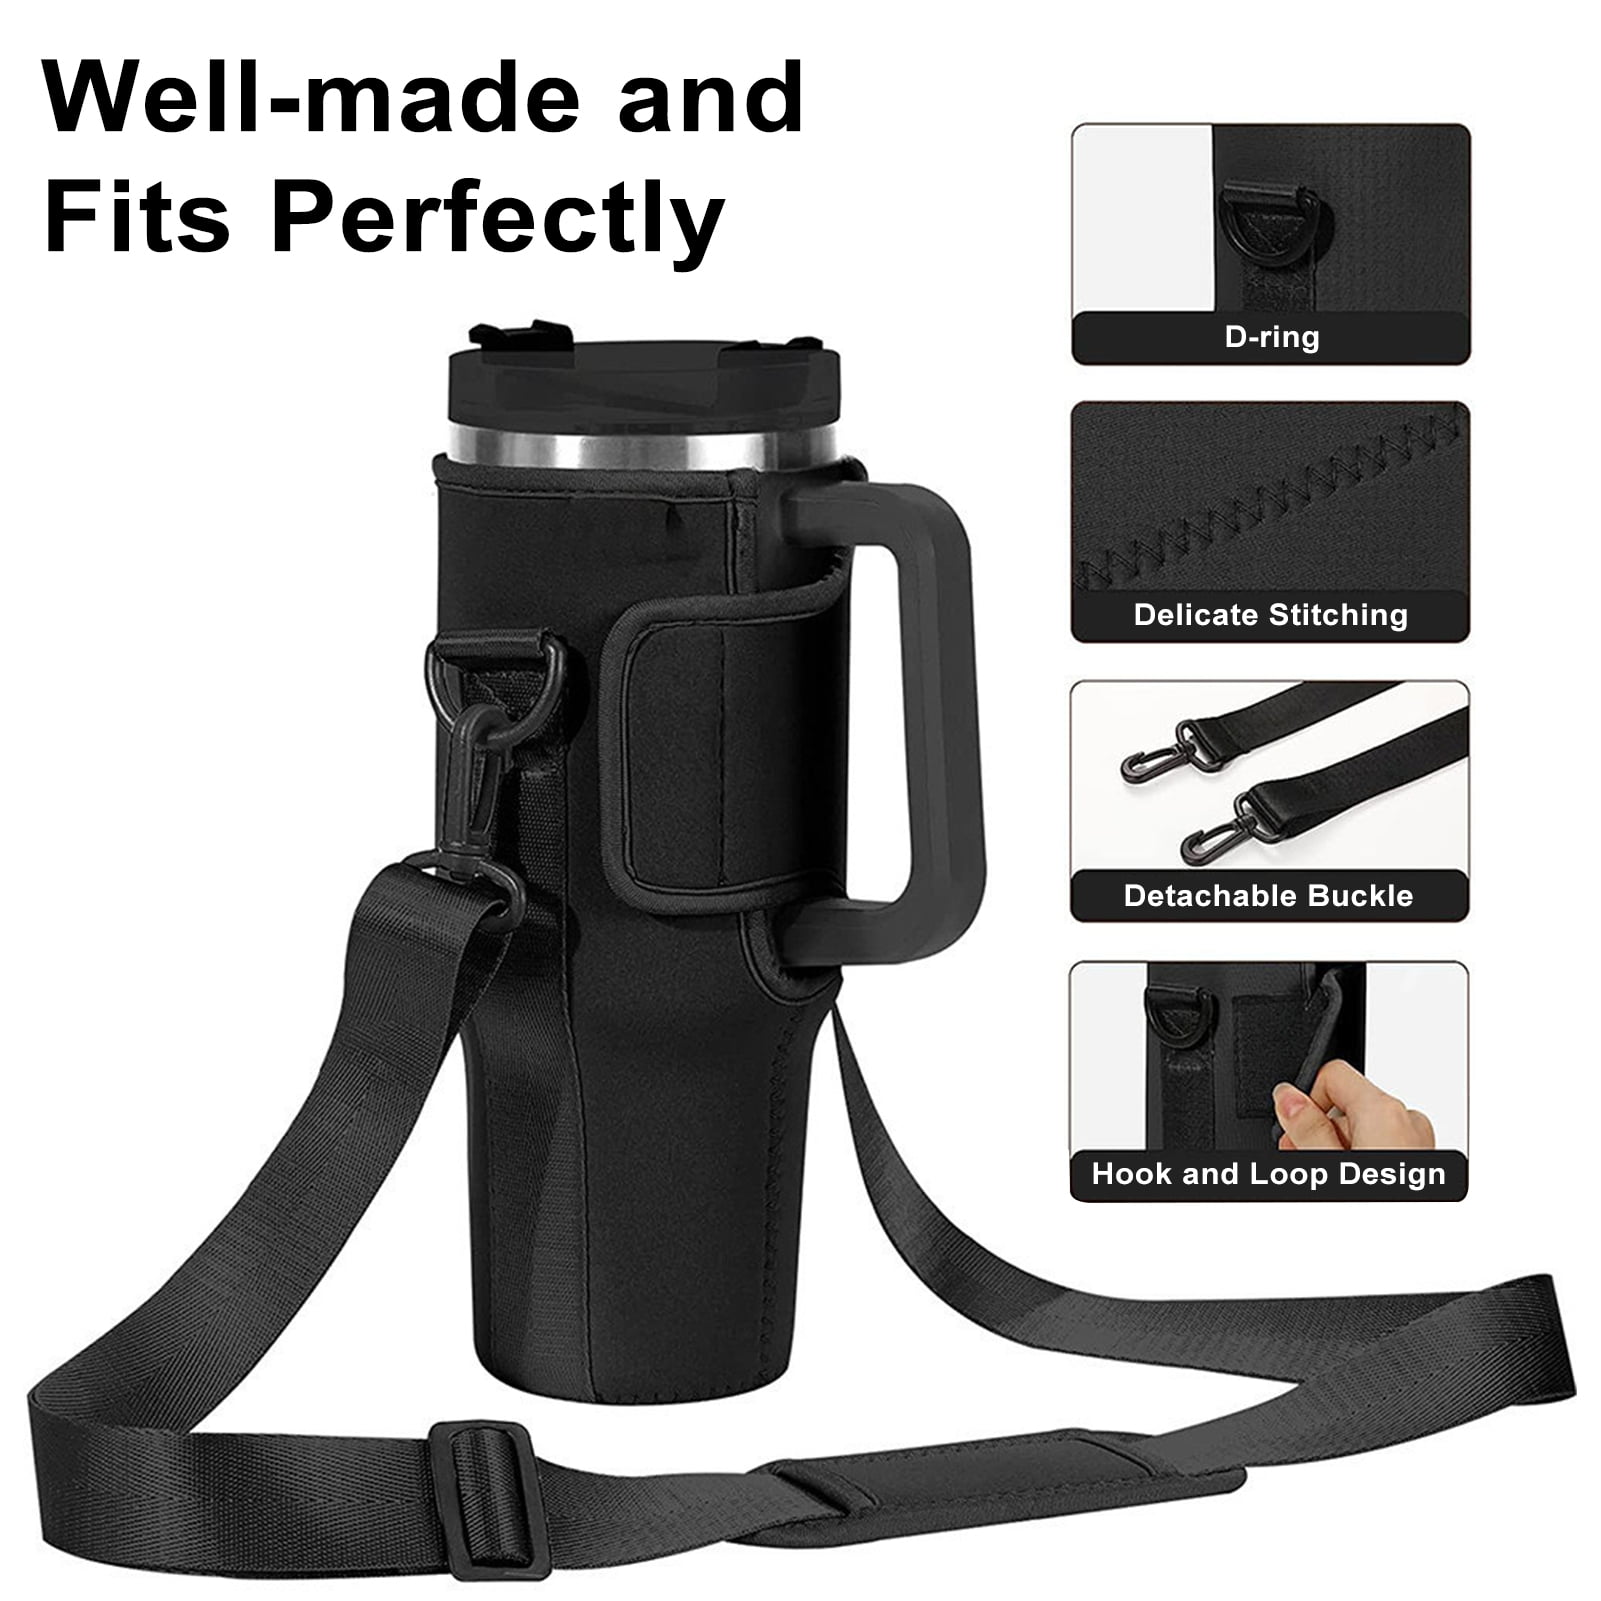 Kaufe Replacement Cup Sleeve Extension Strap Adjustable Cup Carrier Pouch  Lanyard Outdoor Camping Tool